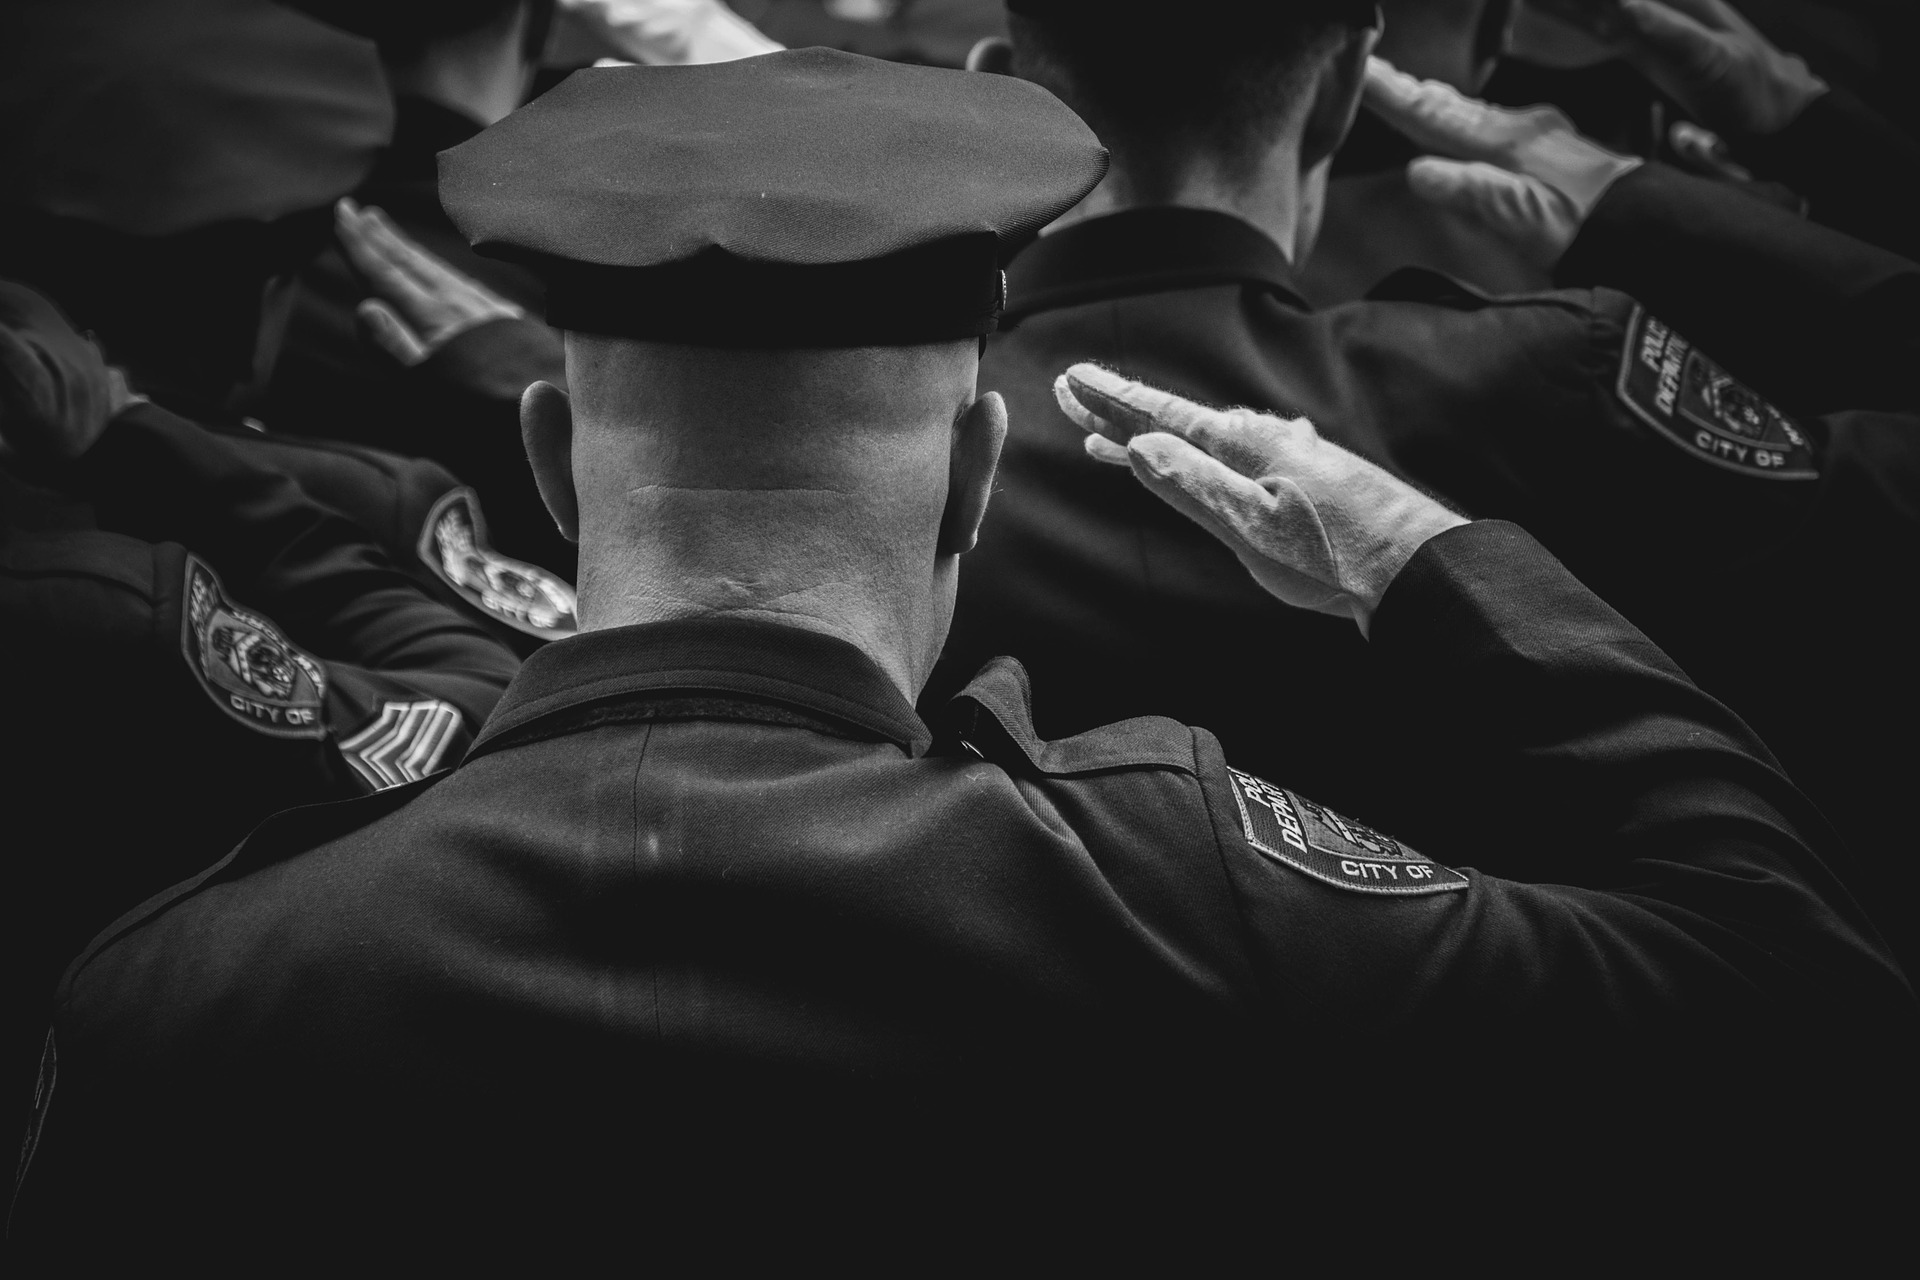 behind view of police officer saluting in a line of police offers